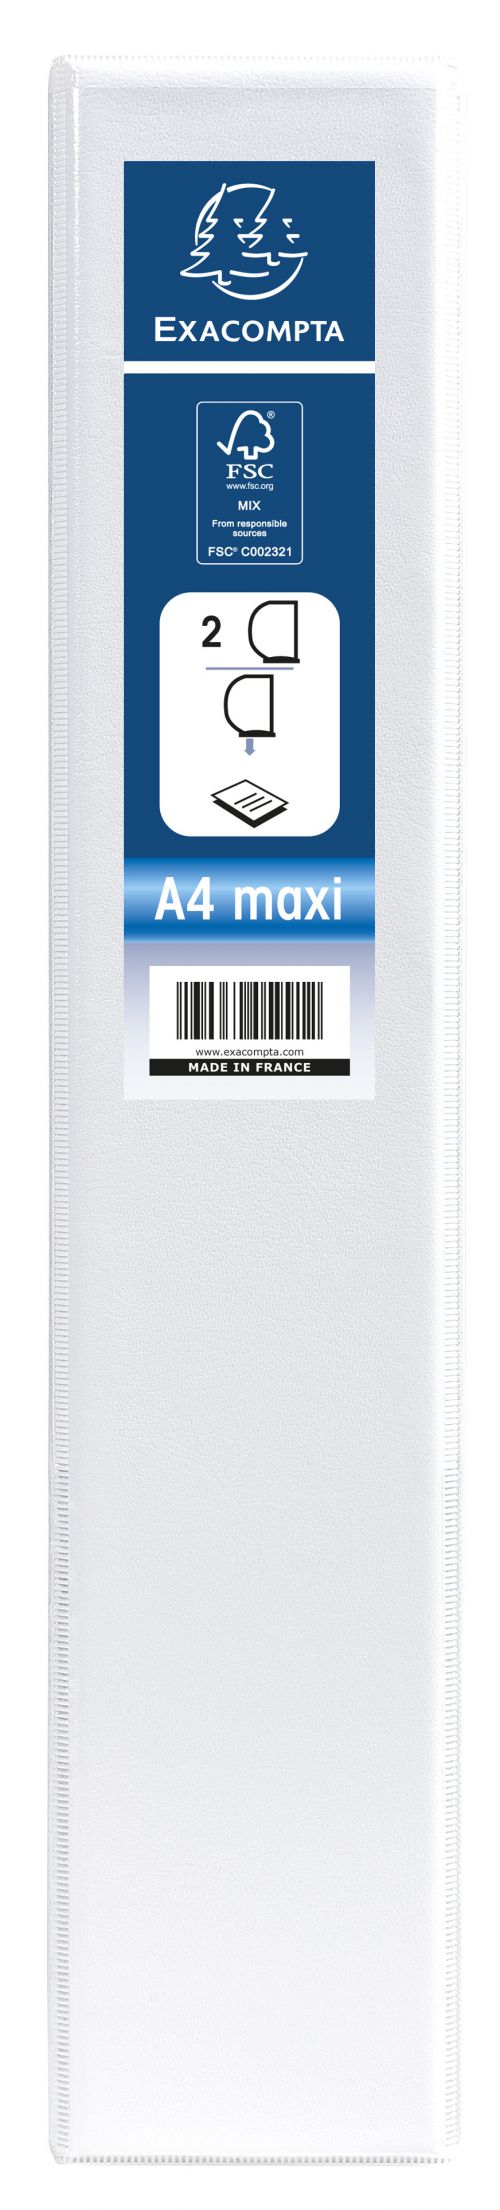 Exacompta Kreacover Presentation Ring Binder PVC 2 D-Ring A4 40mm Rings White (Pack 10) - 51823E 47412EX Buy online at Office 5Star or contact us Tel 01594 810081 for assistance